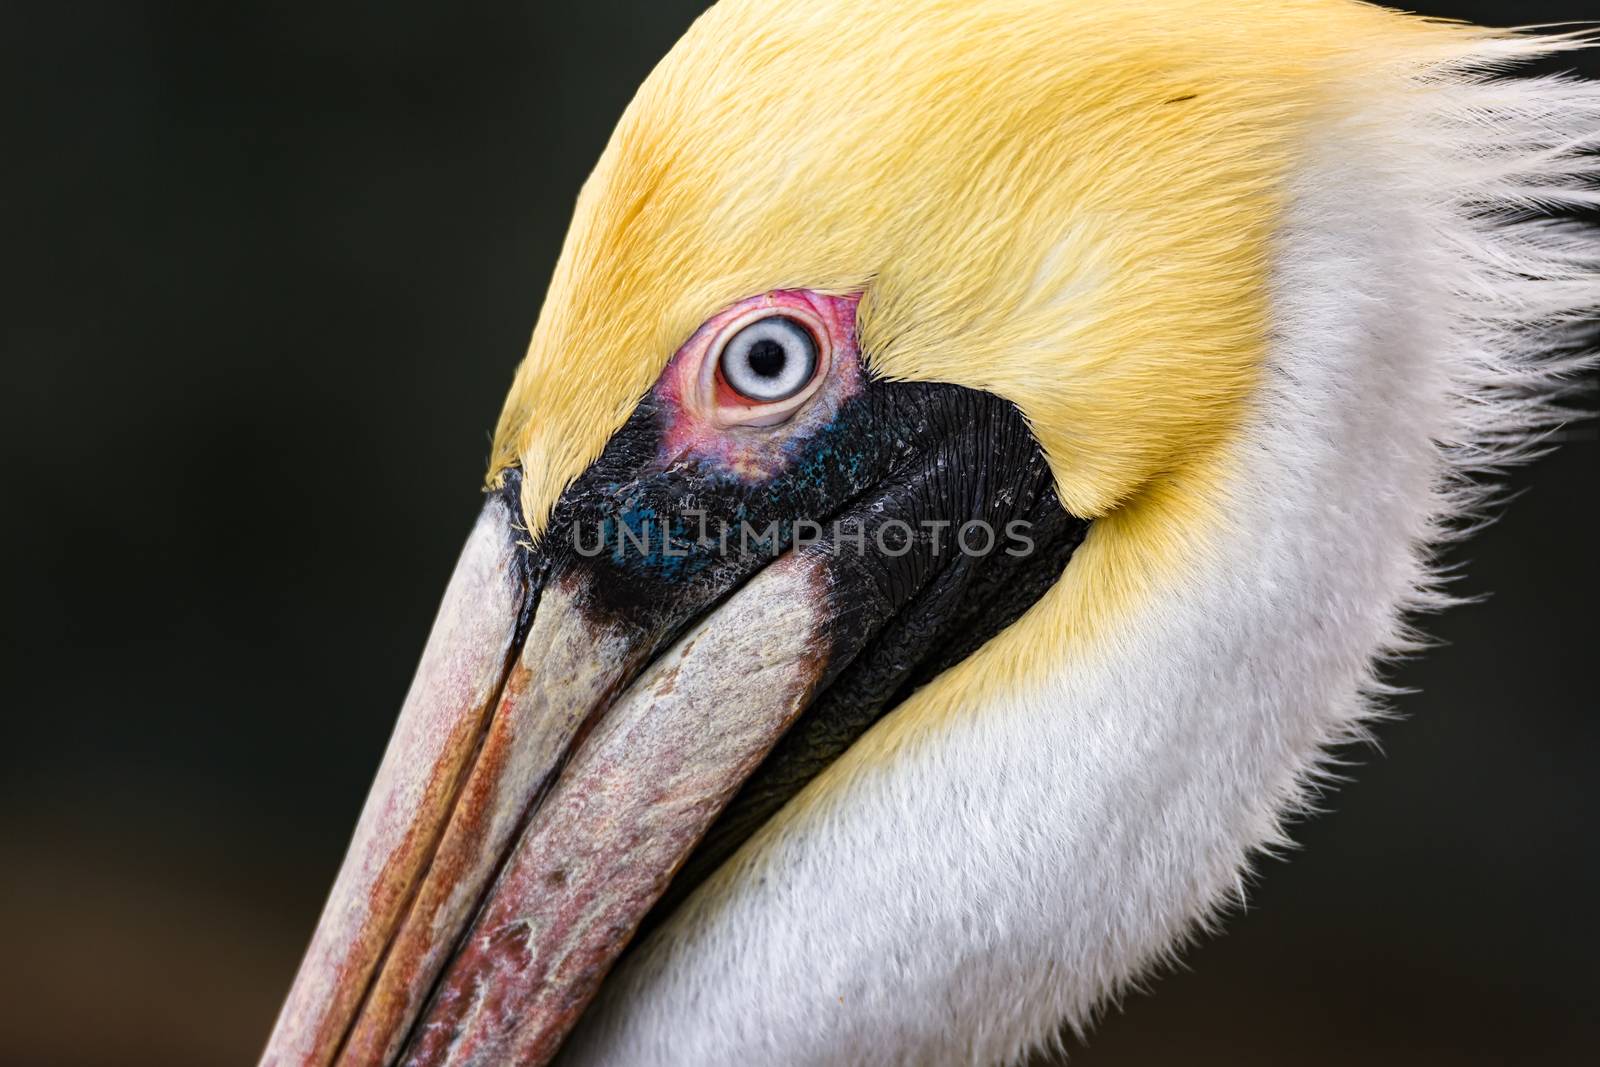 A Pelican Profile by backyard_photography